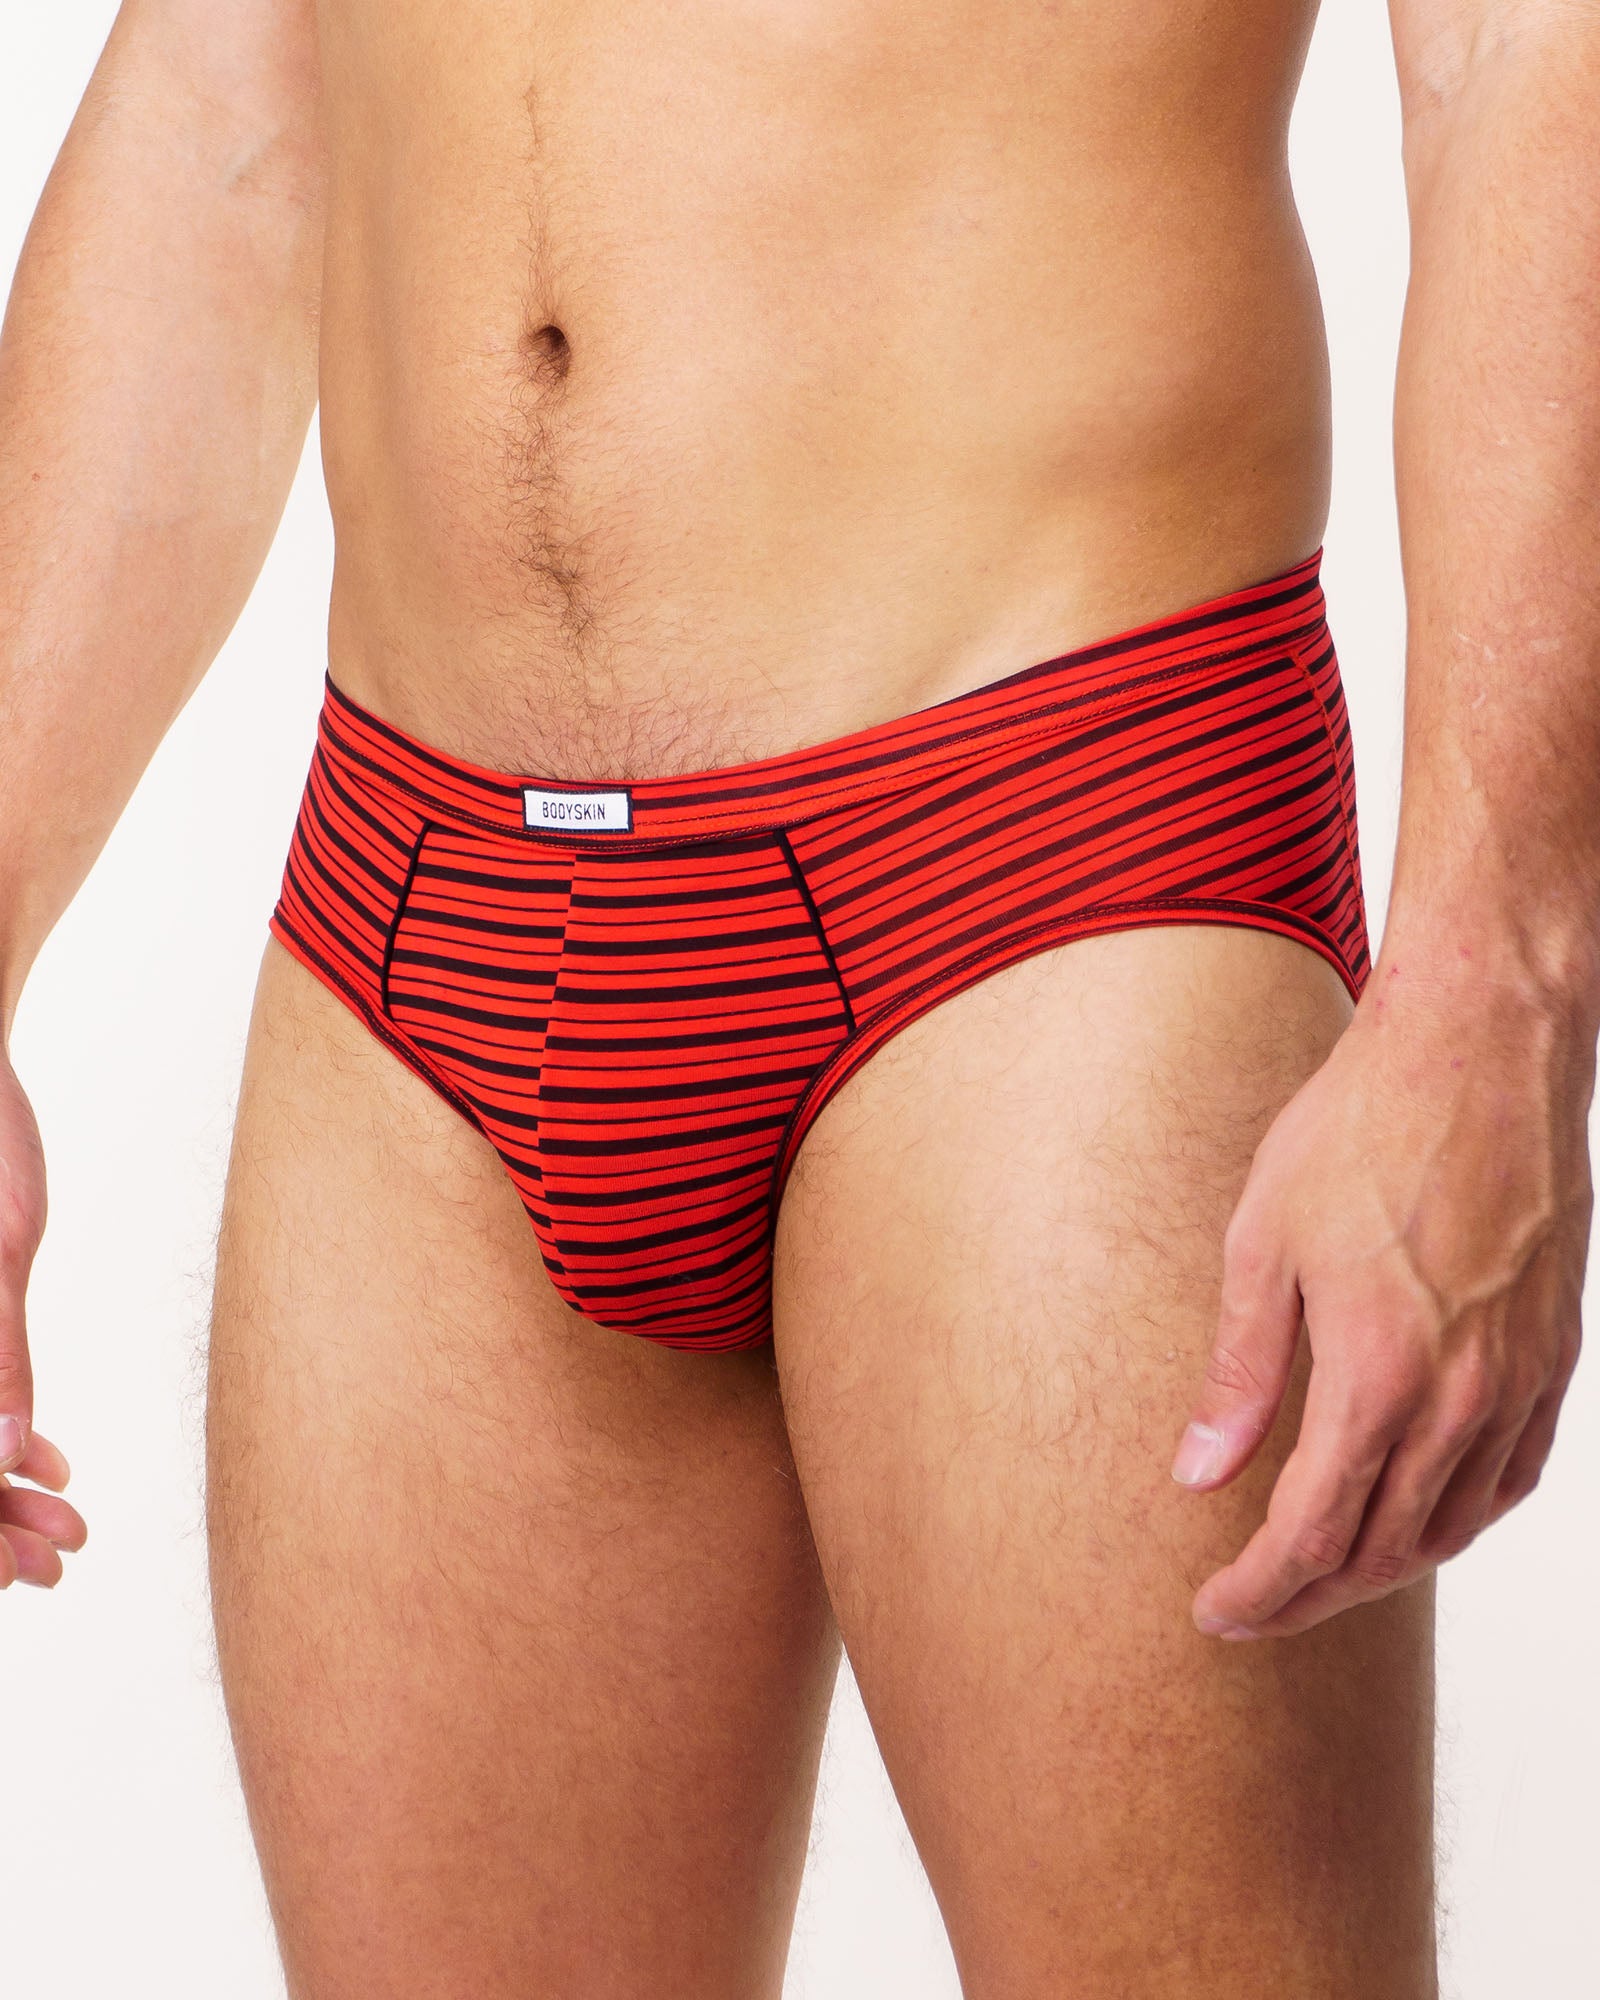 Red Bodyskin brief with lines – Mesbobettes